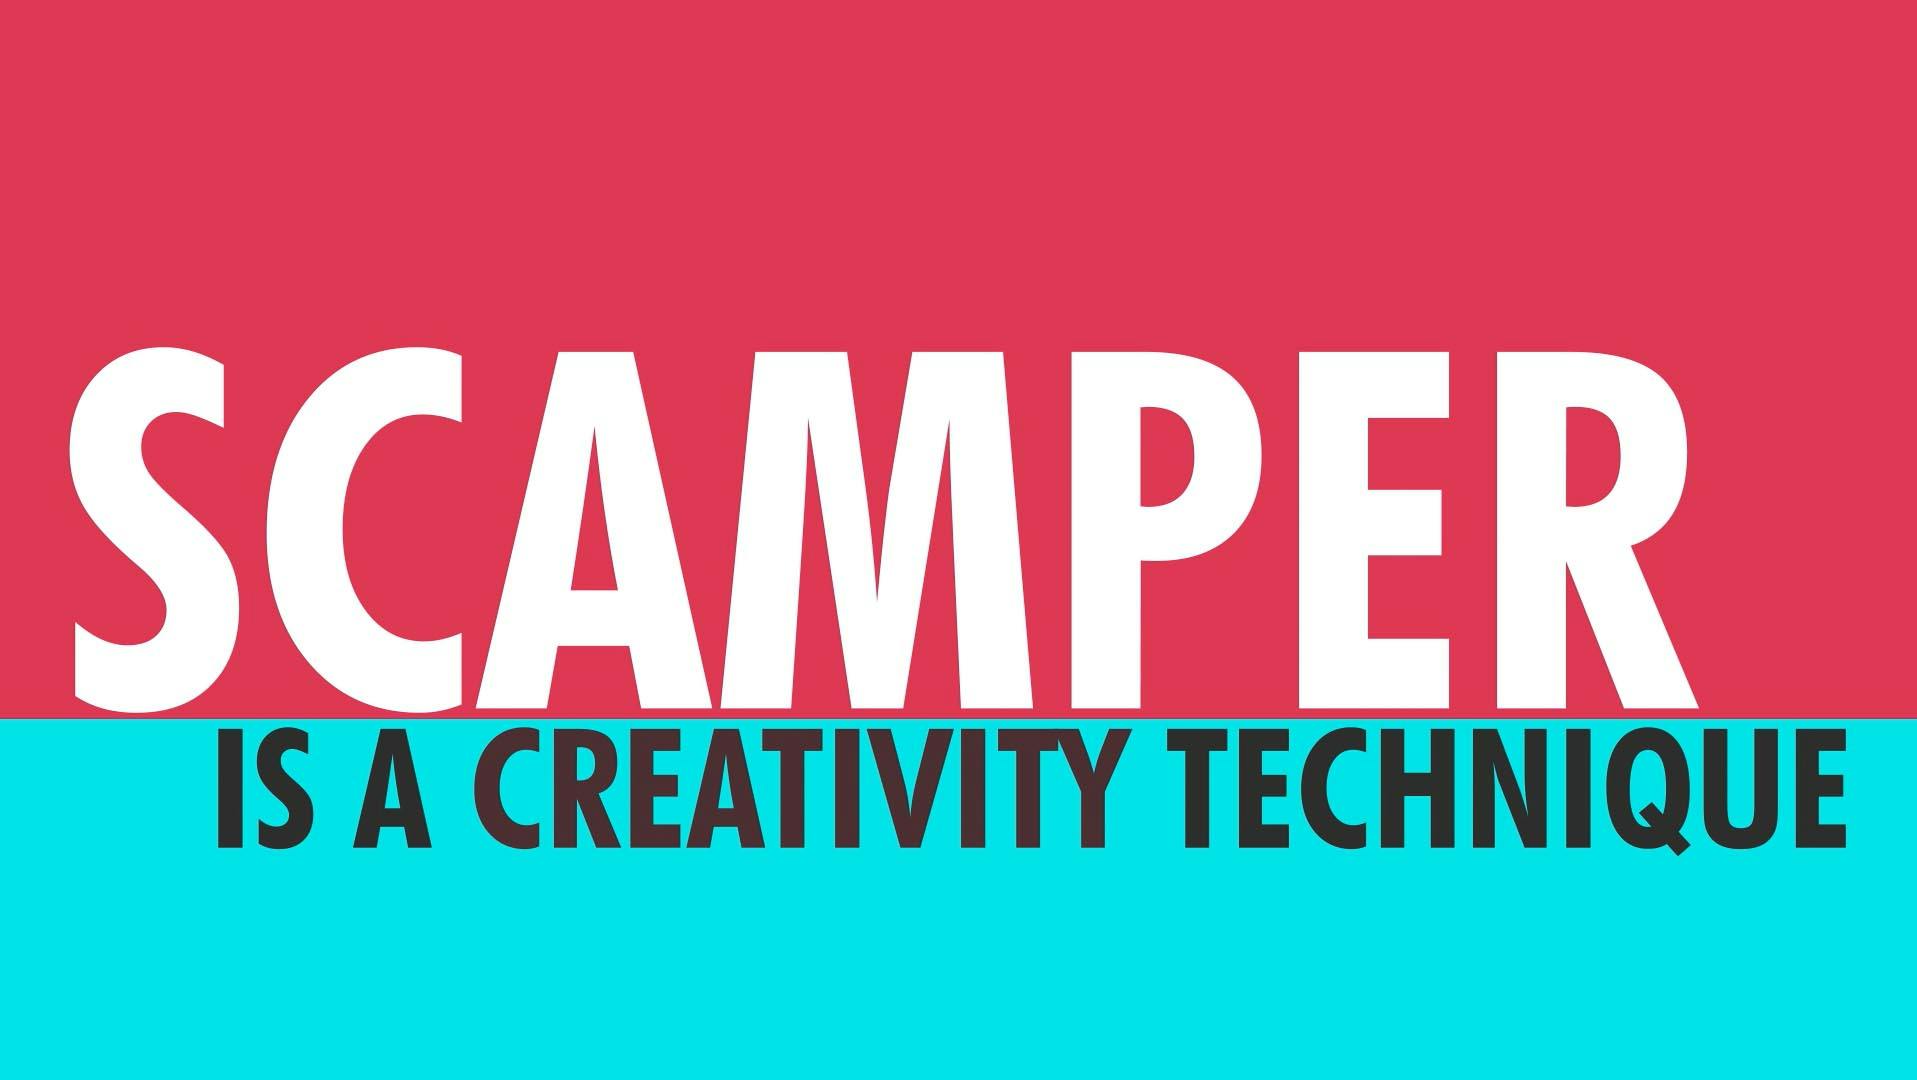 Use SCAMPER to come up with excellent ideas